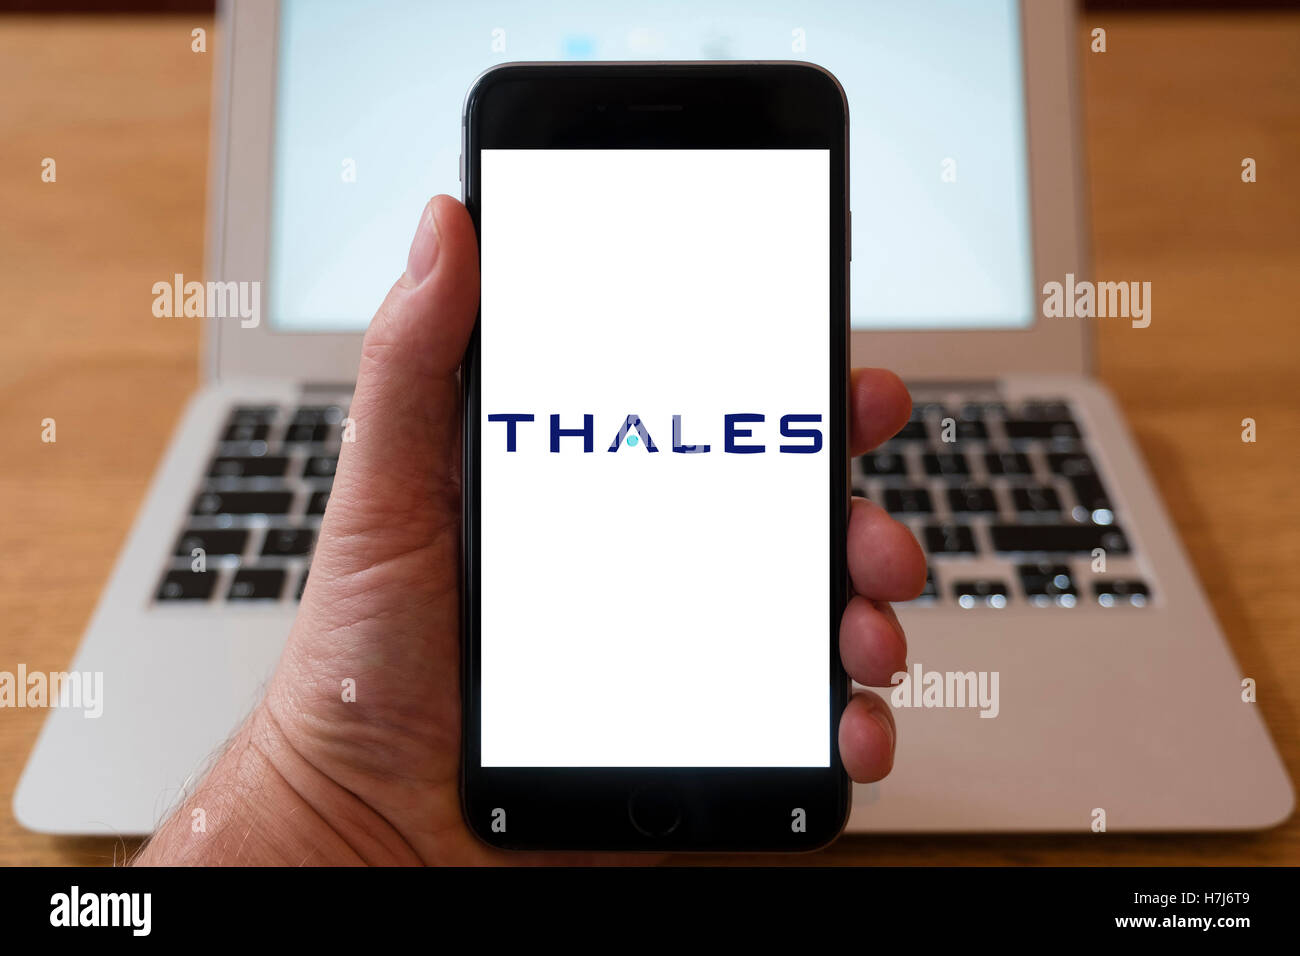 Using iPhone smart phone to display logo of Thales Stock Photo